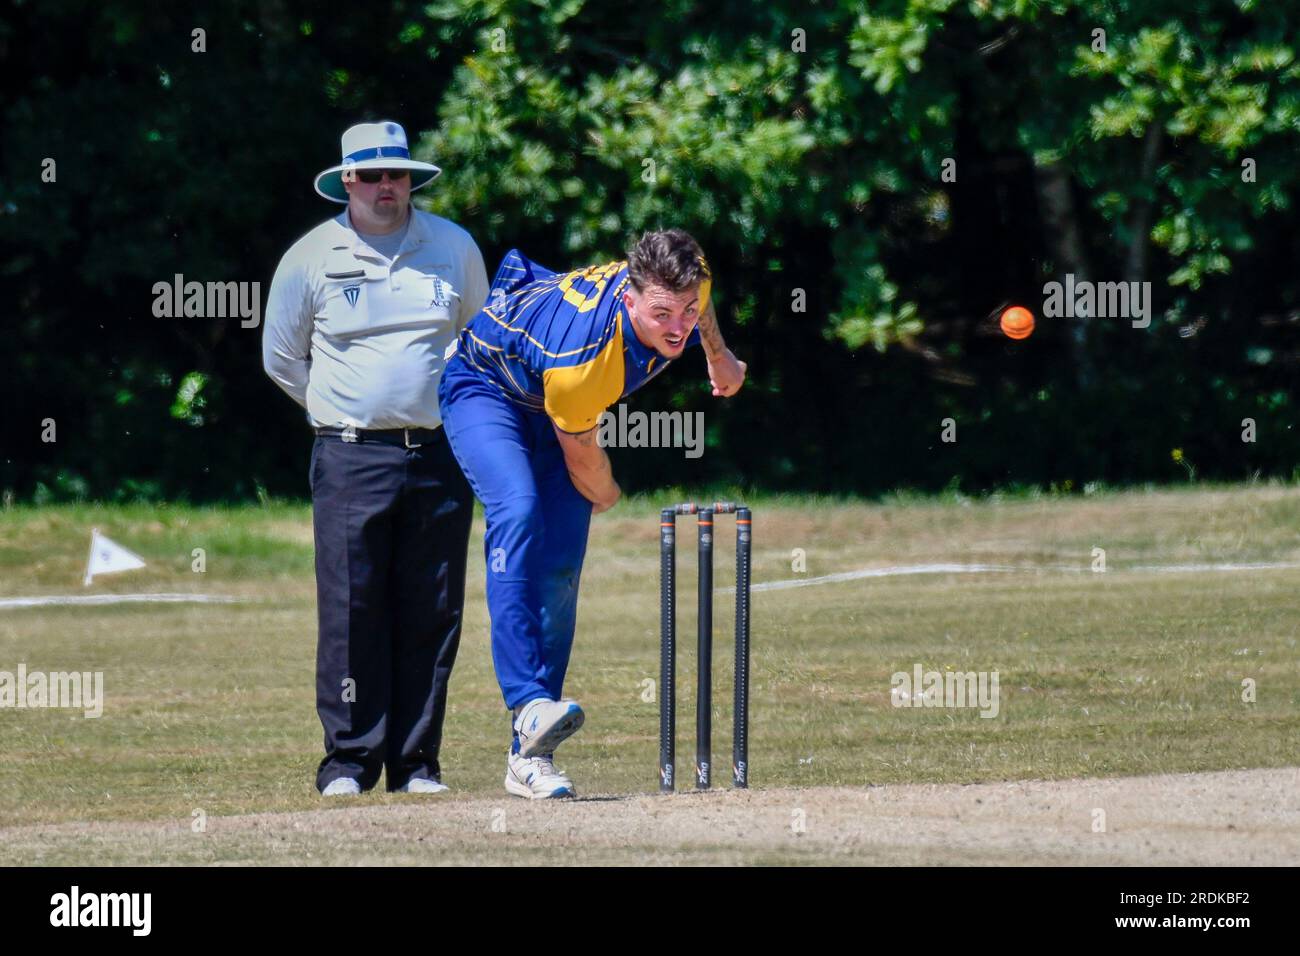 Clydach, Wales. 3 June 2023. Jack Todd of Clydach bowling during the South Wales Premier Cricket League Division Two match between Clydach and Chepstow at Waverley Park in Clydach, Wales, UK on 3 June 2023. Credit: Duncan Thomas/Majestic Media. Stock Photo